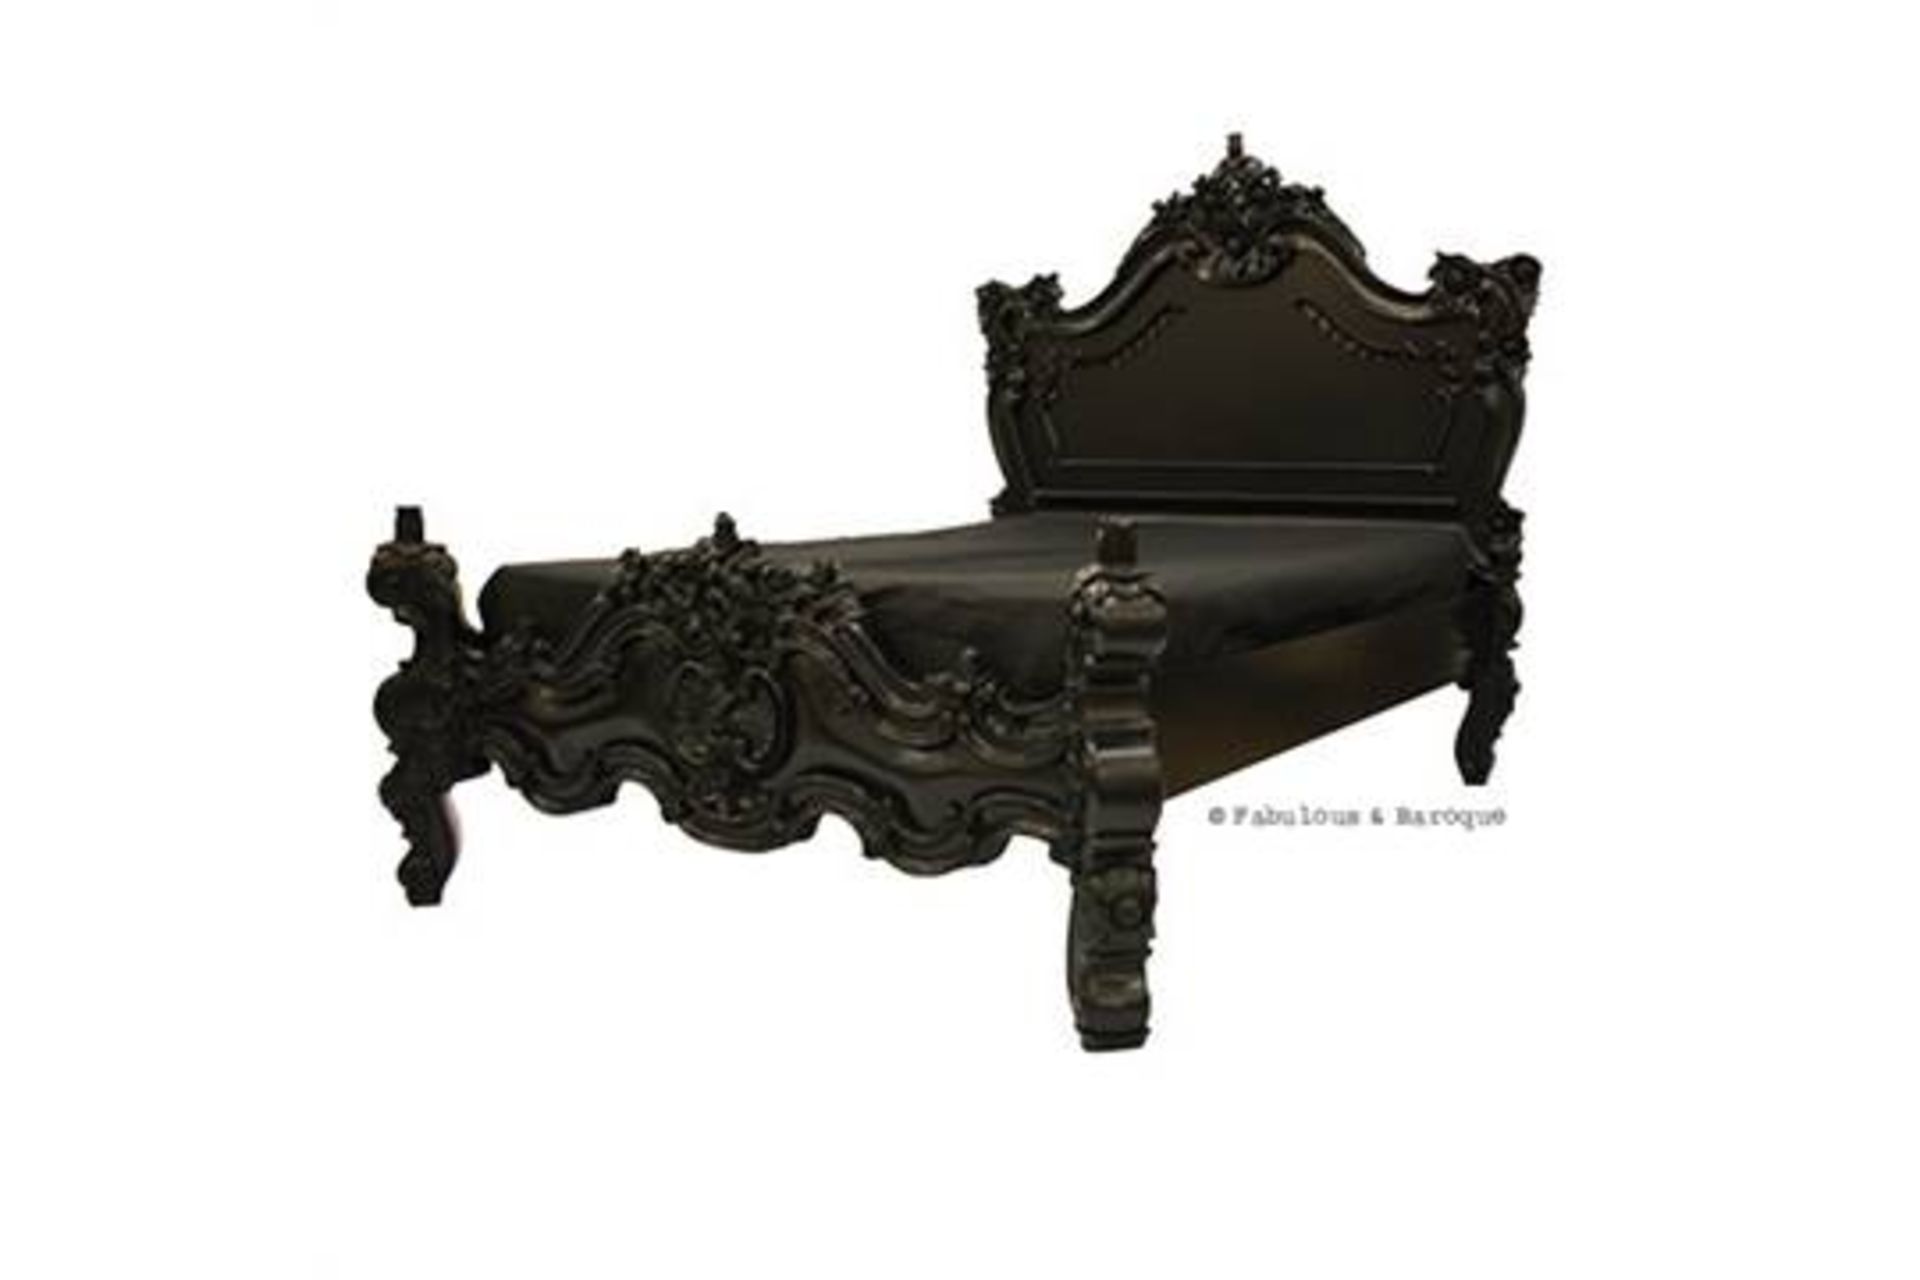 4ft 6in Double
Royal Fortune Montespan Bed - Black -  The Fabulous & Rococo Bed features
exaggerated - Image 6 of 7